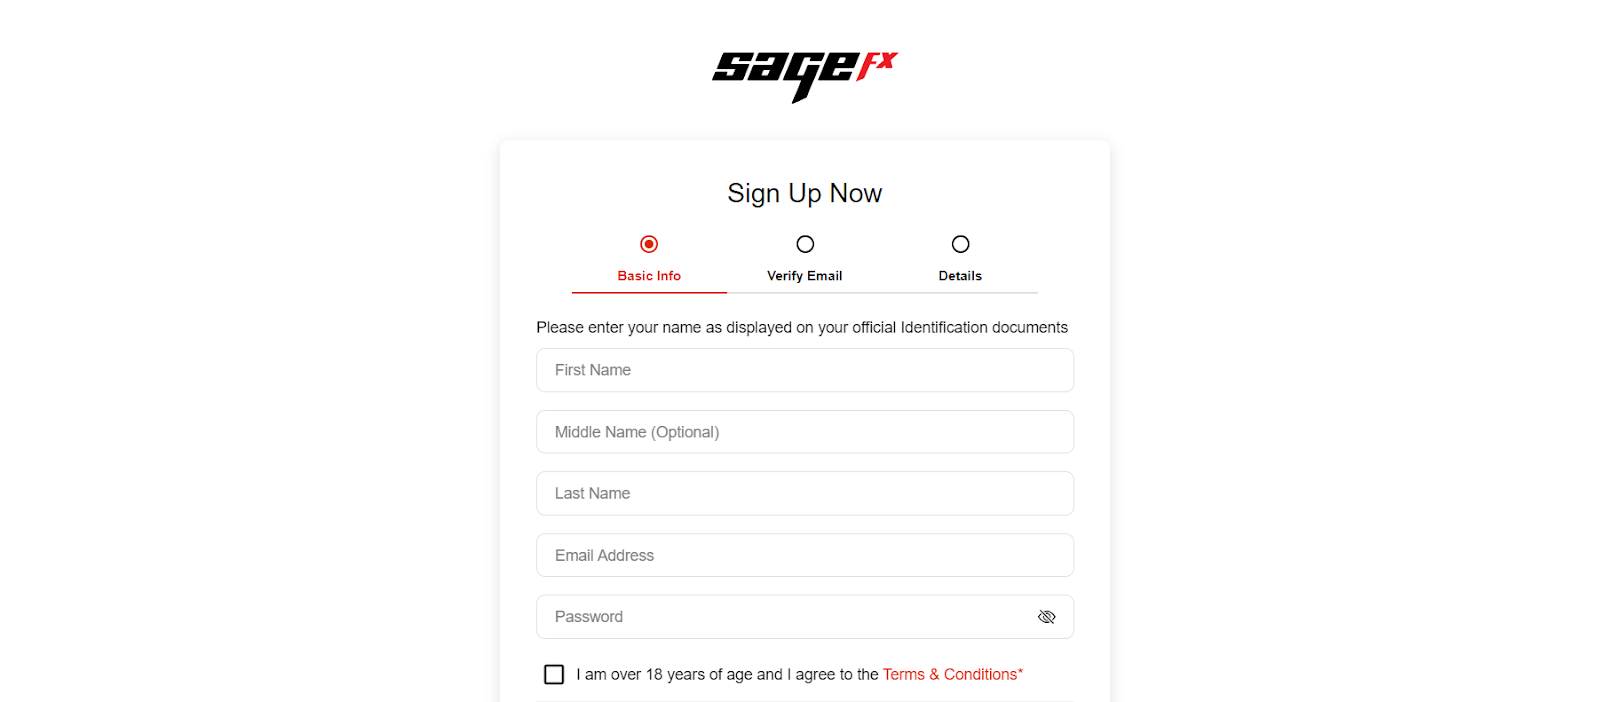 Review of Sage FX’s User Account — Registration form